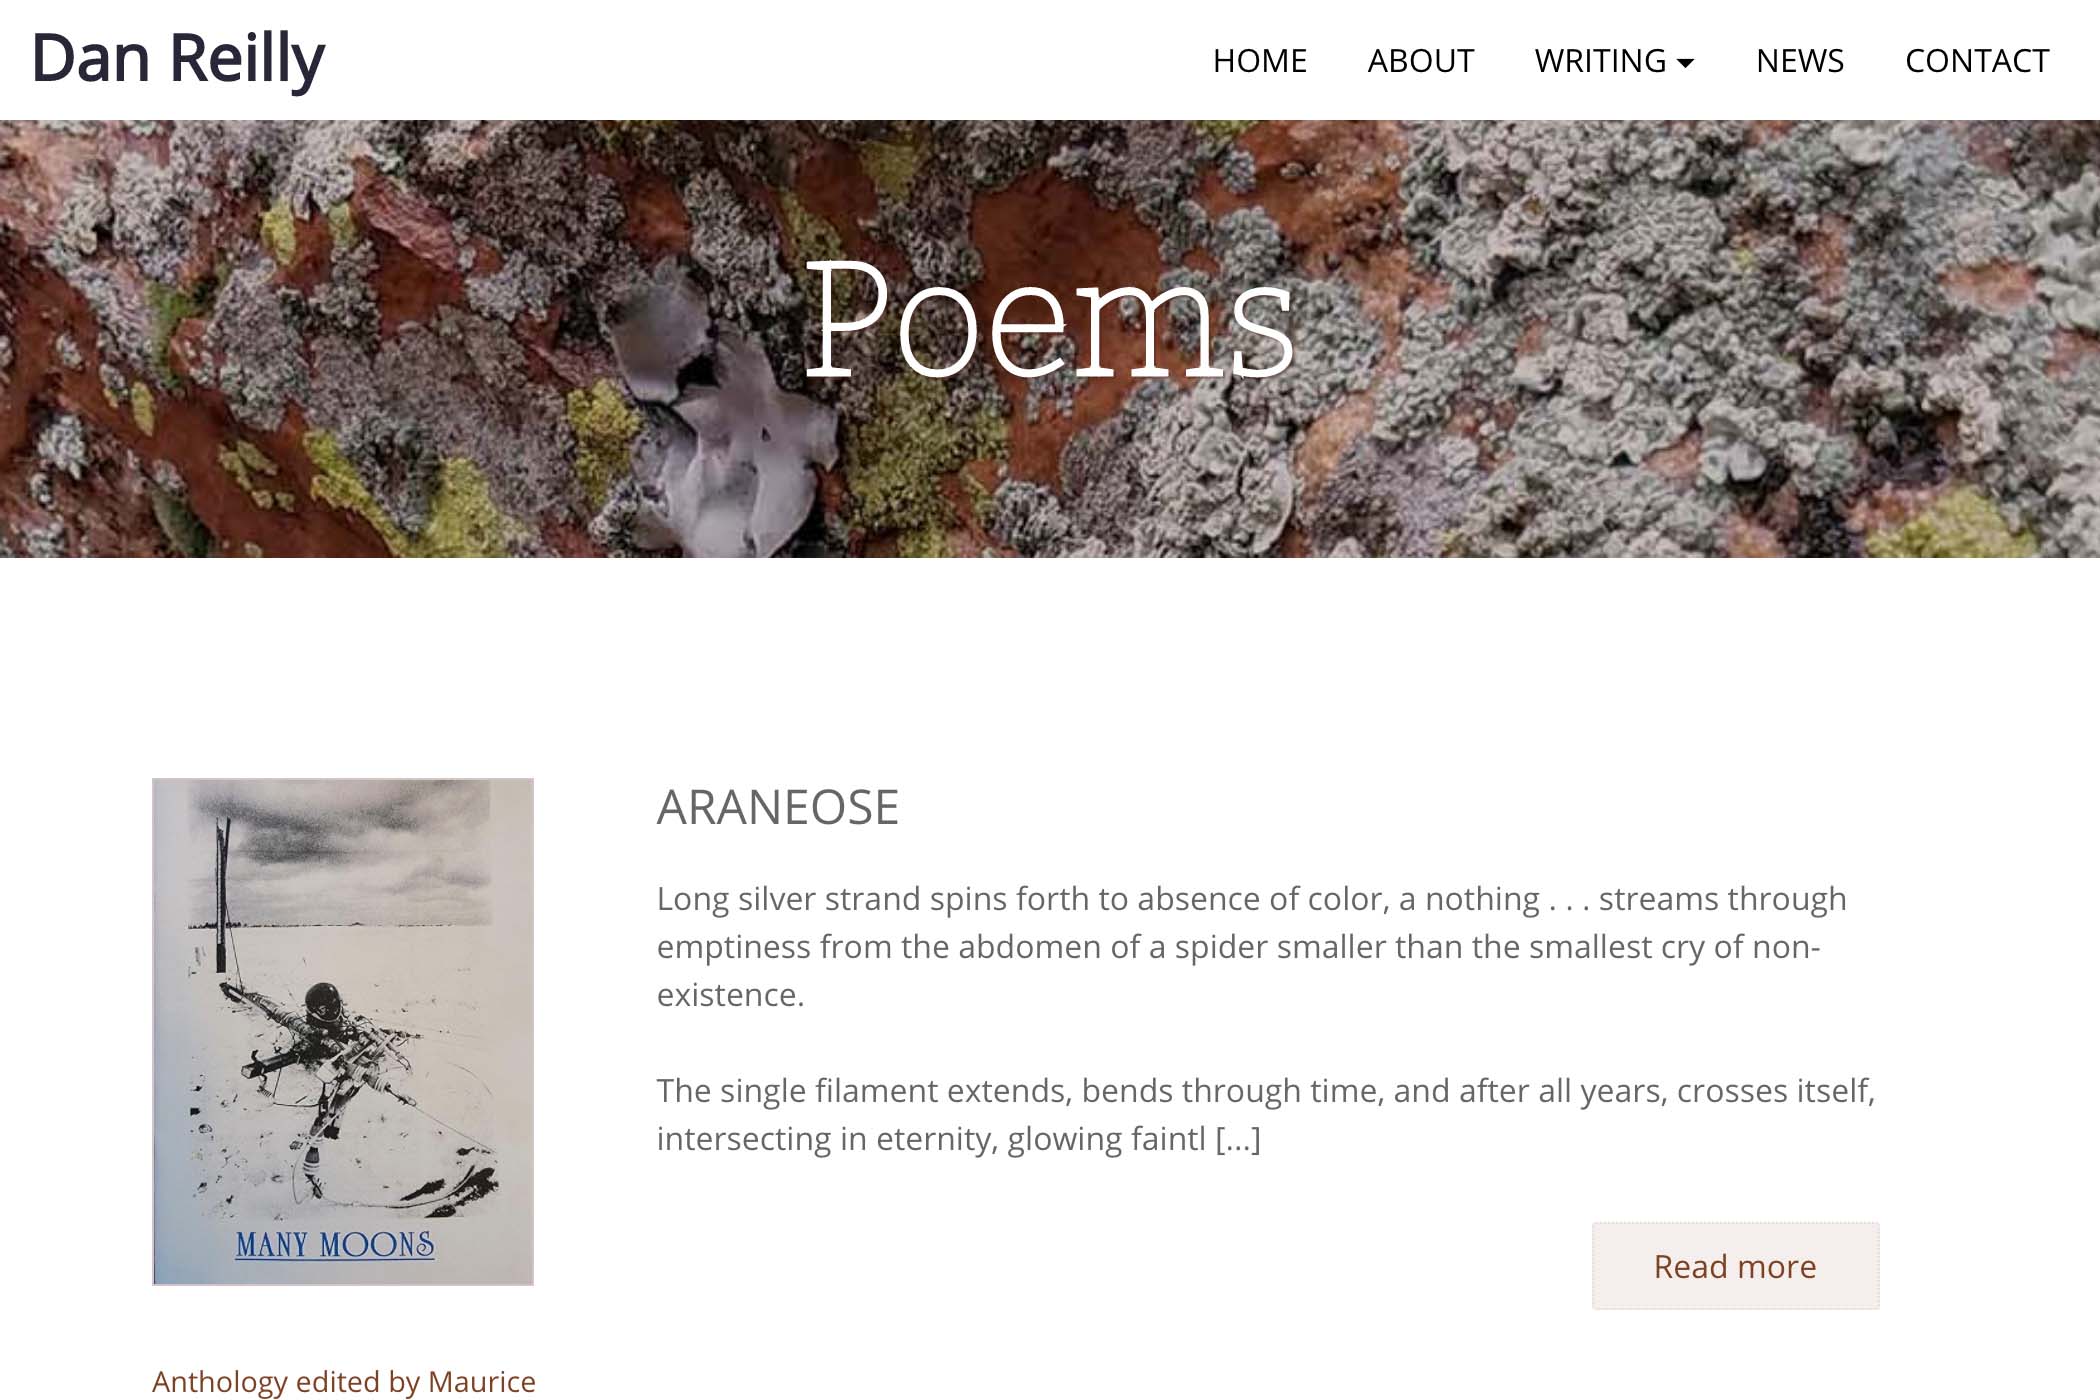 website design for a writer - poems page